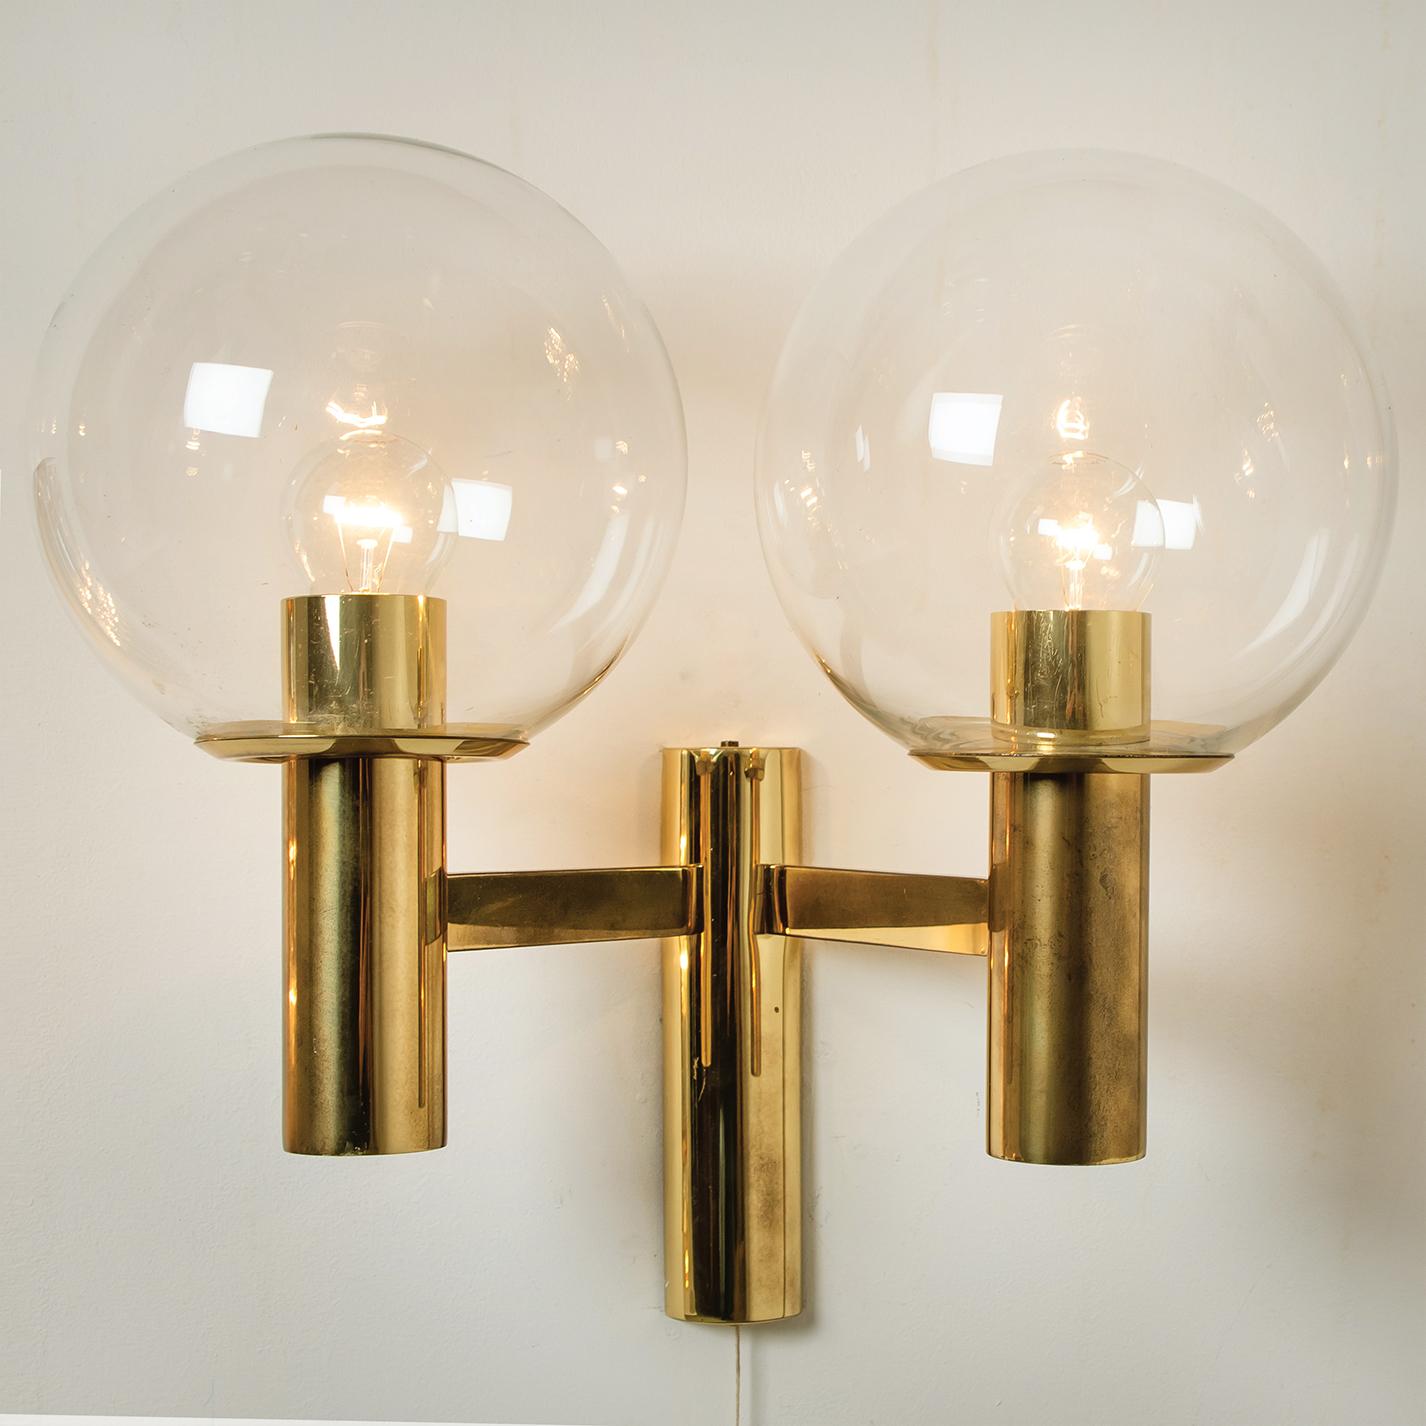 Danish Pair of Wall Lights the Style of Hans-Agne Jacobsson, Schweden, 1960